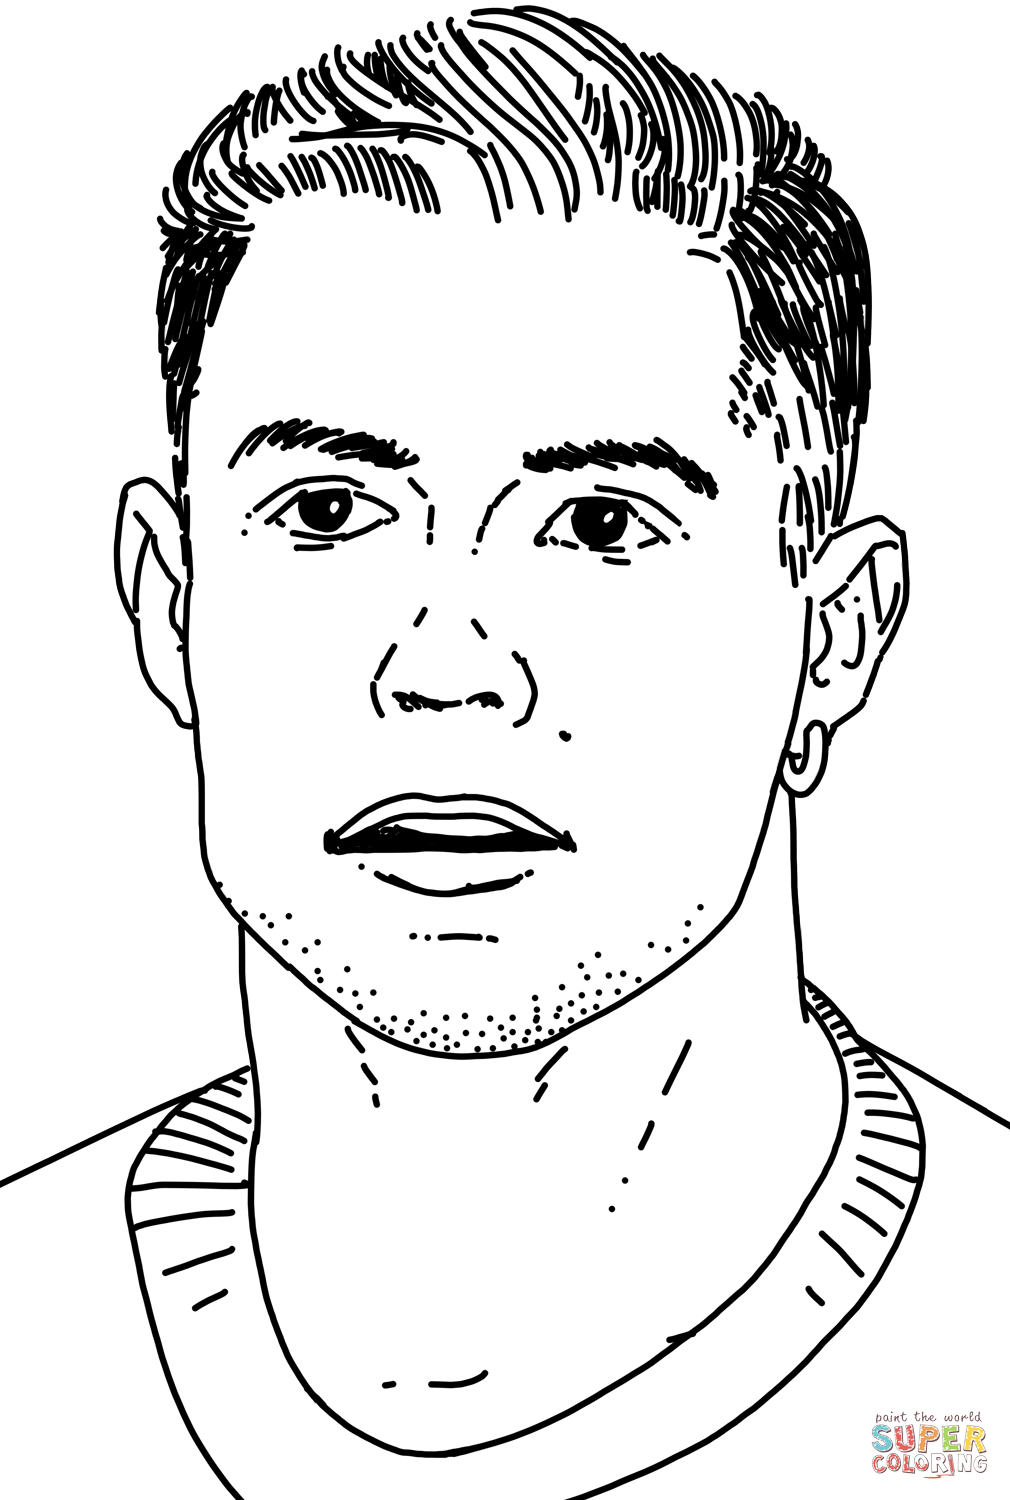 Cristiano ronaldo coloring page free printable coloring pages